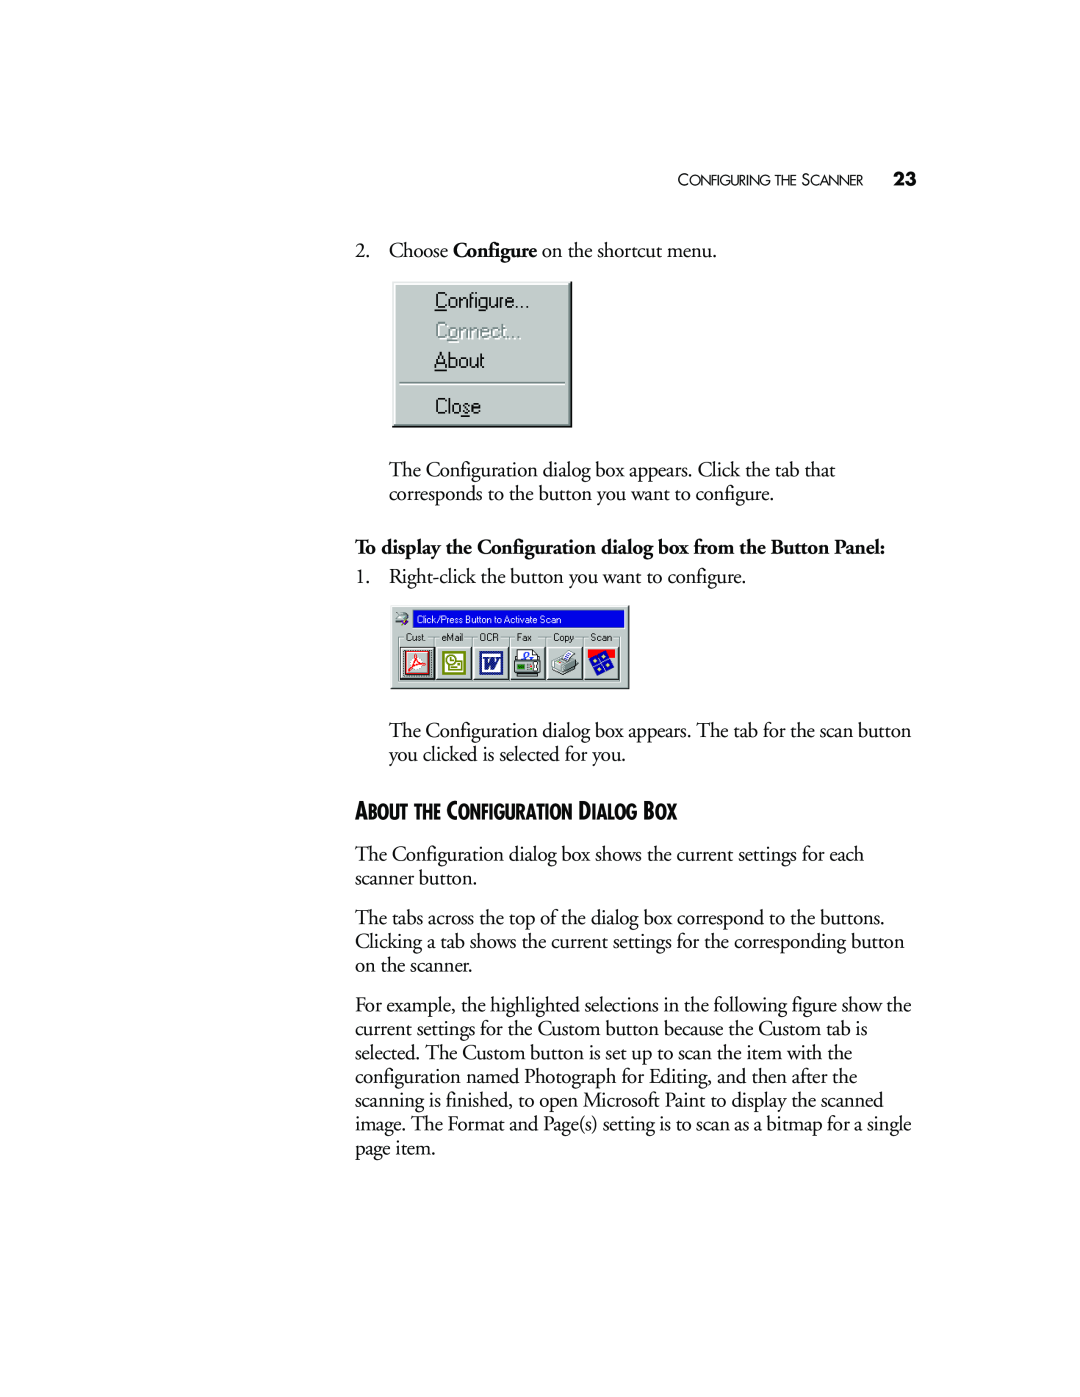 Visioneer 8920 manual About The Configuration Dialog Box, To display the Configuration dialog box from the Button Panel 